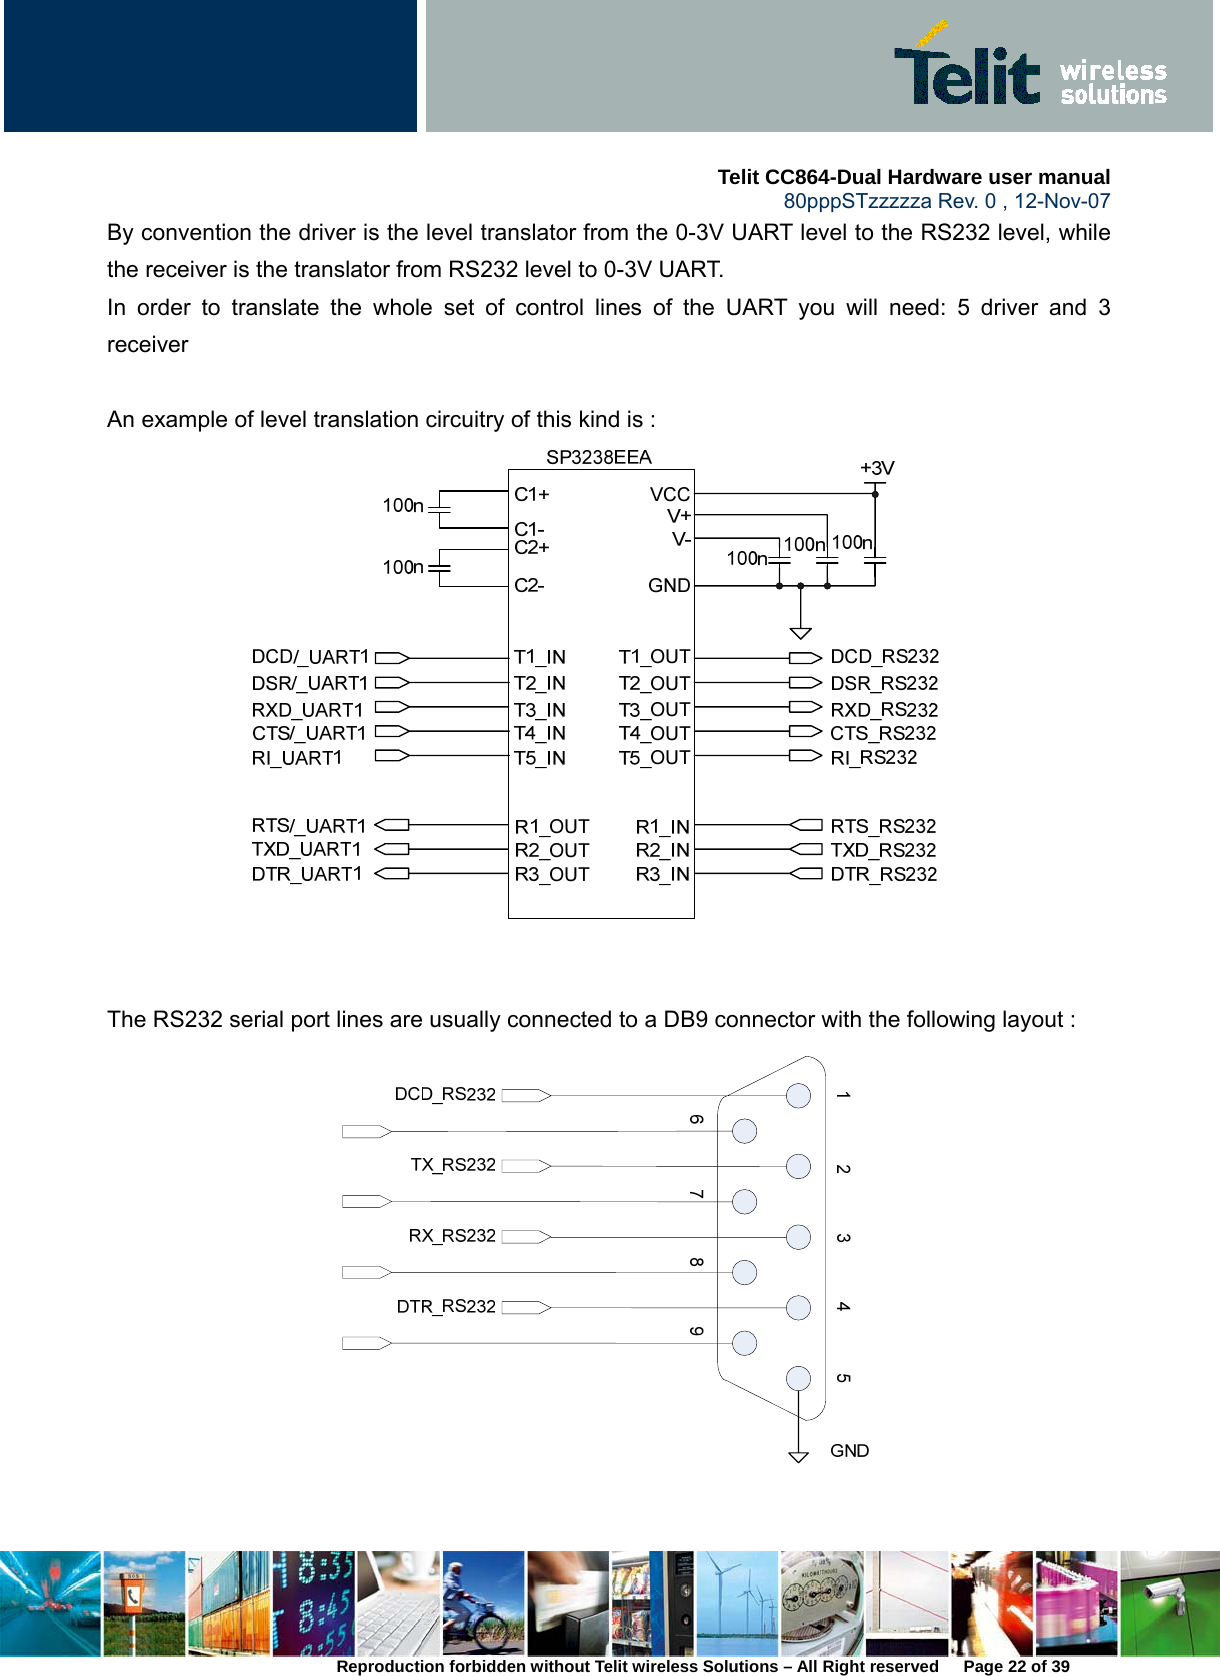     Telit CC864-Dual Hardware user manual   80pppSTzzzzza Rev. 0 , 12-Nov-07 Reproduction forbidden without Telit wireless Solutions – All Right reserved      Page 22 of 39 By convention the driver is the level translator from the 0-3V UART level to the RS232 level, while the receiver is the translator from RS232 level to 0-3V UART.   In order to translate the whole set of control lines of the UART you will need: 5 driver and 3 receiver  An example of level translation circuitry of this kind is :      The RS232 serial port lines are usually connected to a DB9 connector with the following layout :     